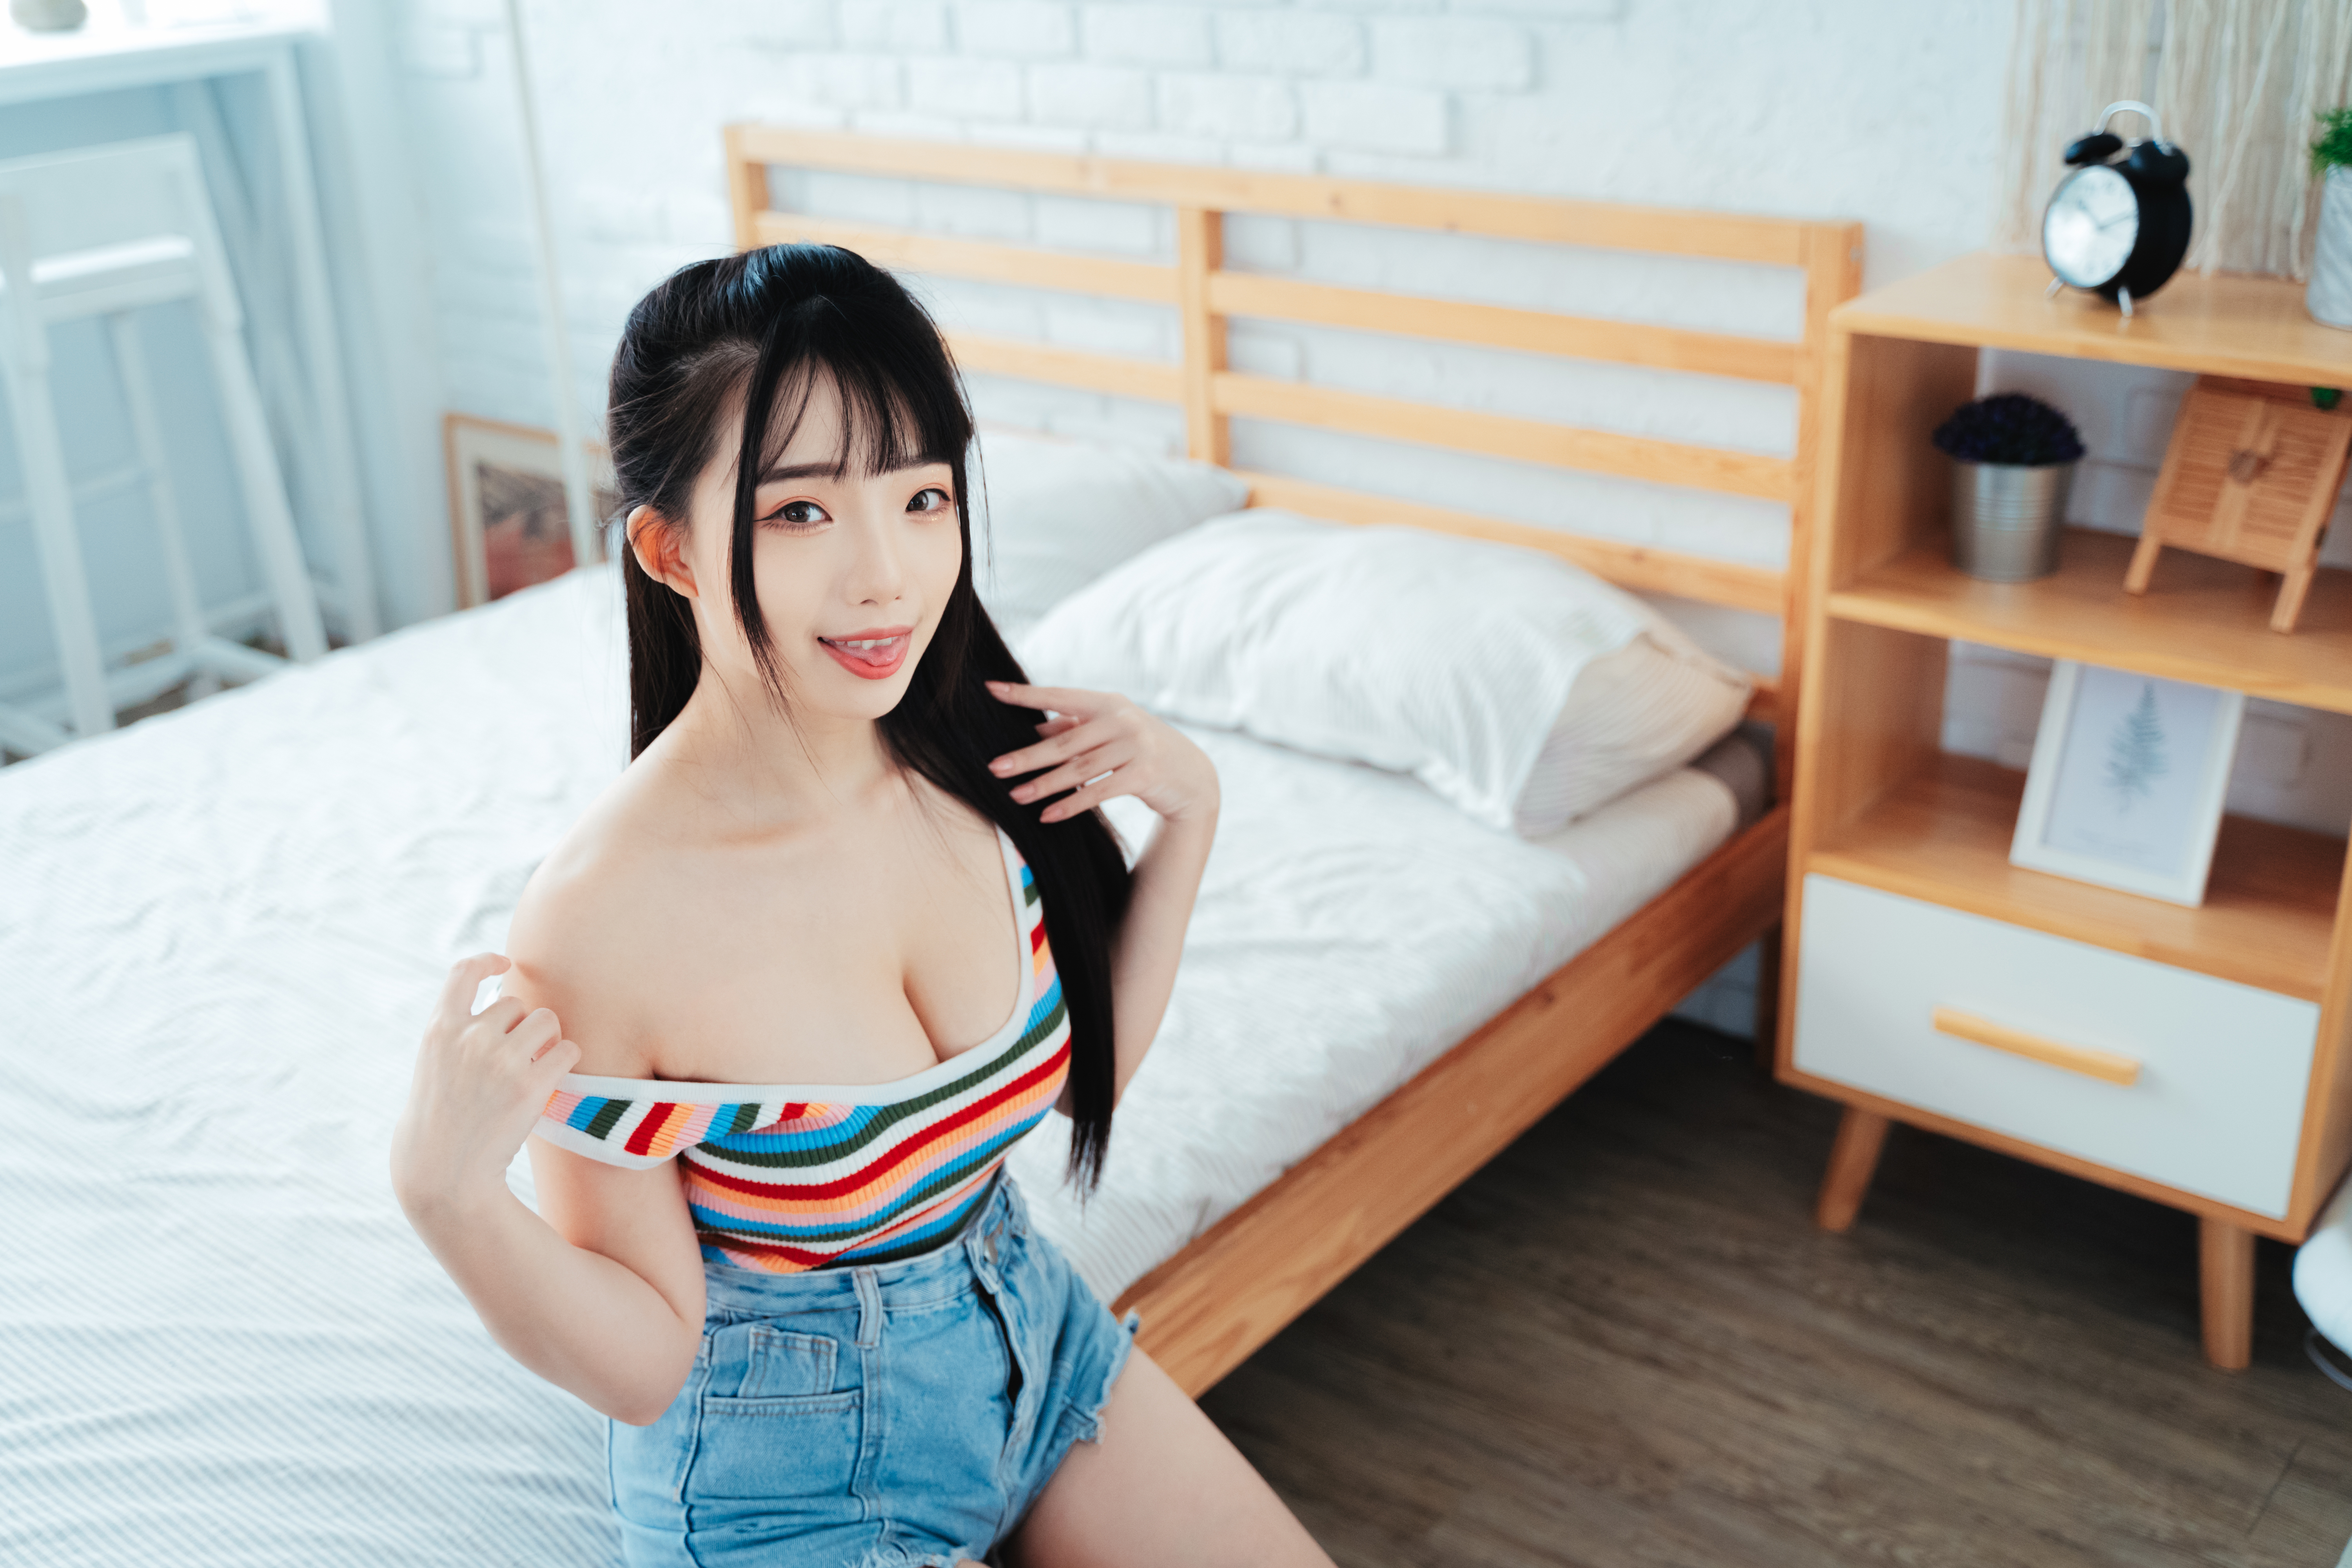 Ning Shioulin Women Model Striped Tops Asian Brunette Tongue Out Bare Shoulders Indoors Women Indoor 6000x4000